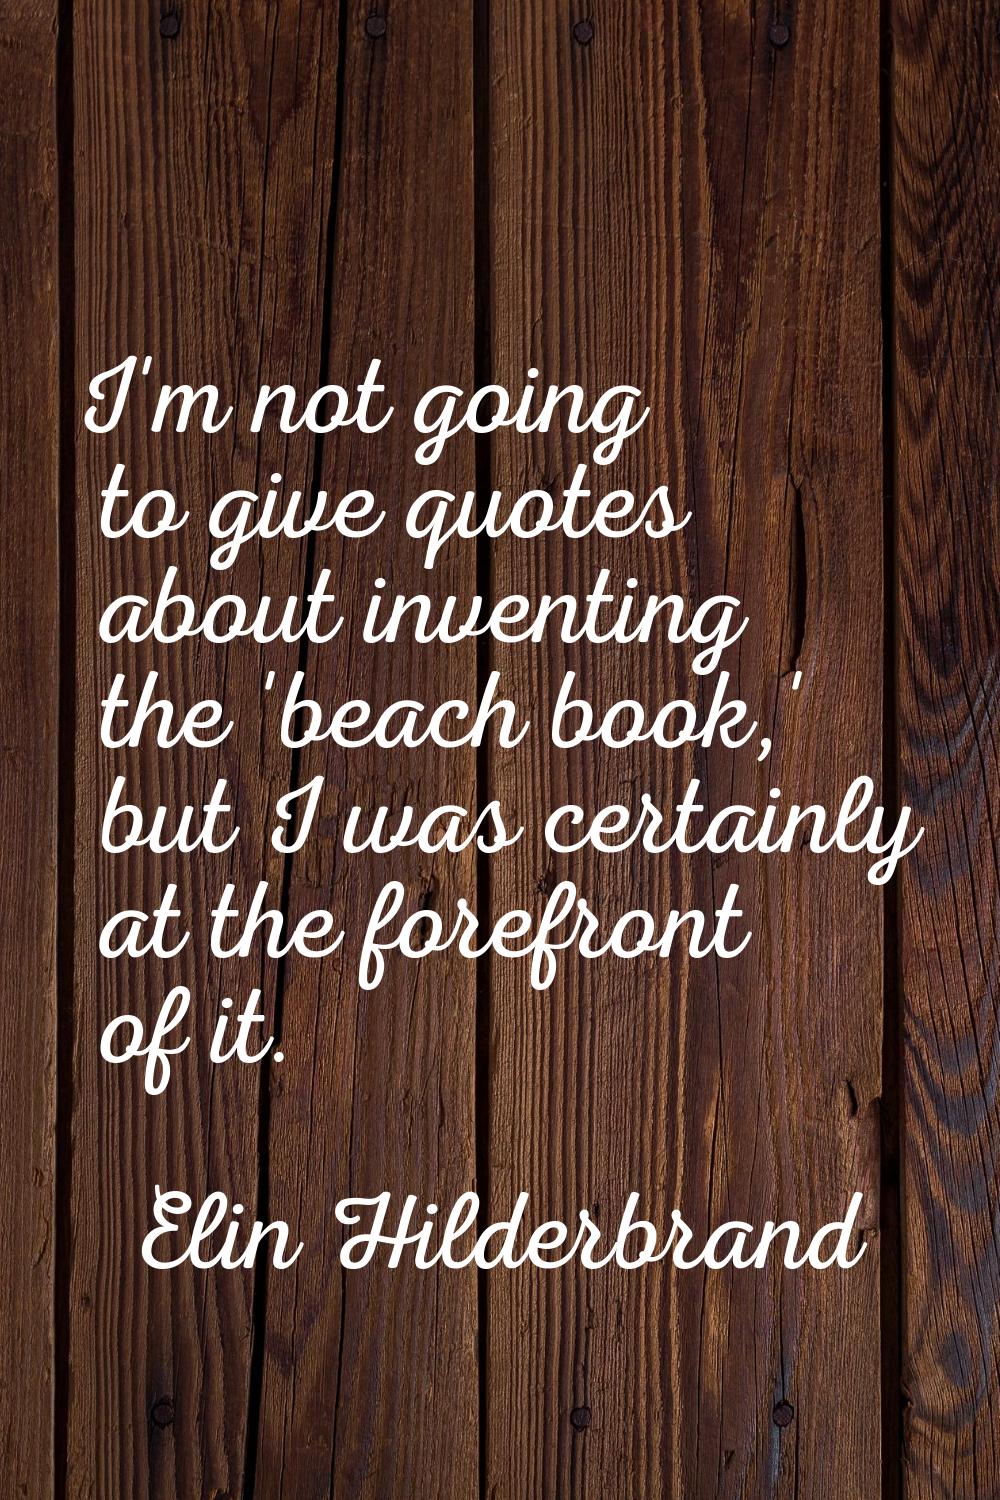 I'm not going to give quotes about inventing the 'beach book,' but I was certainly at the forefront